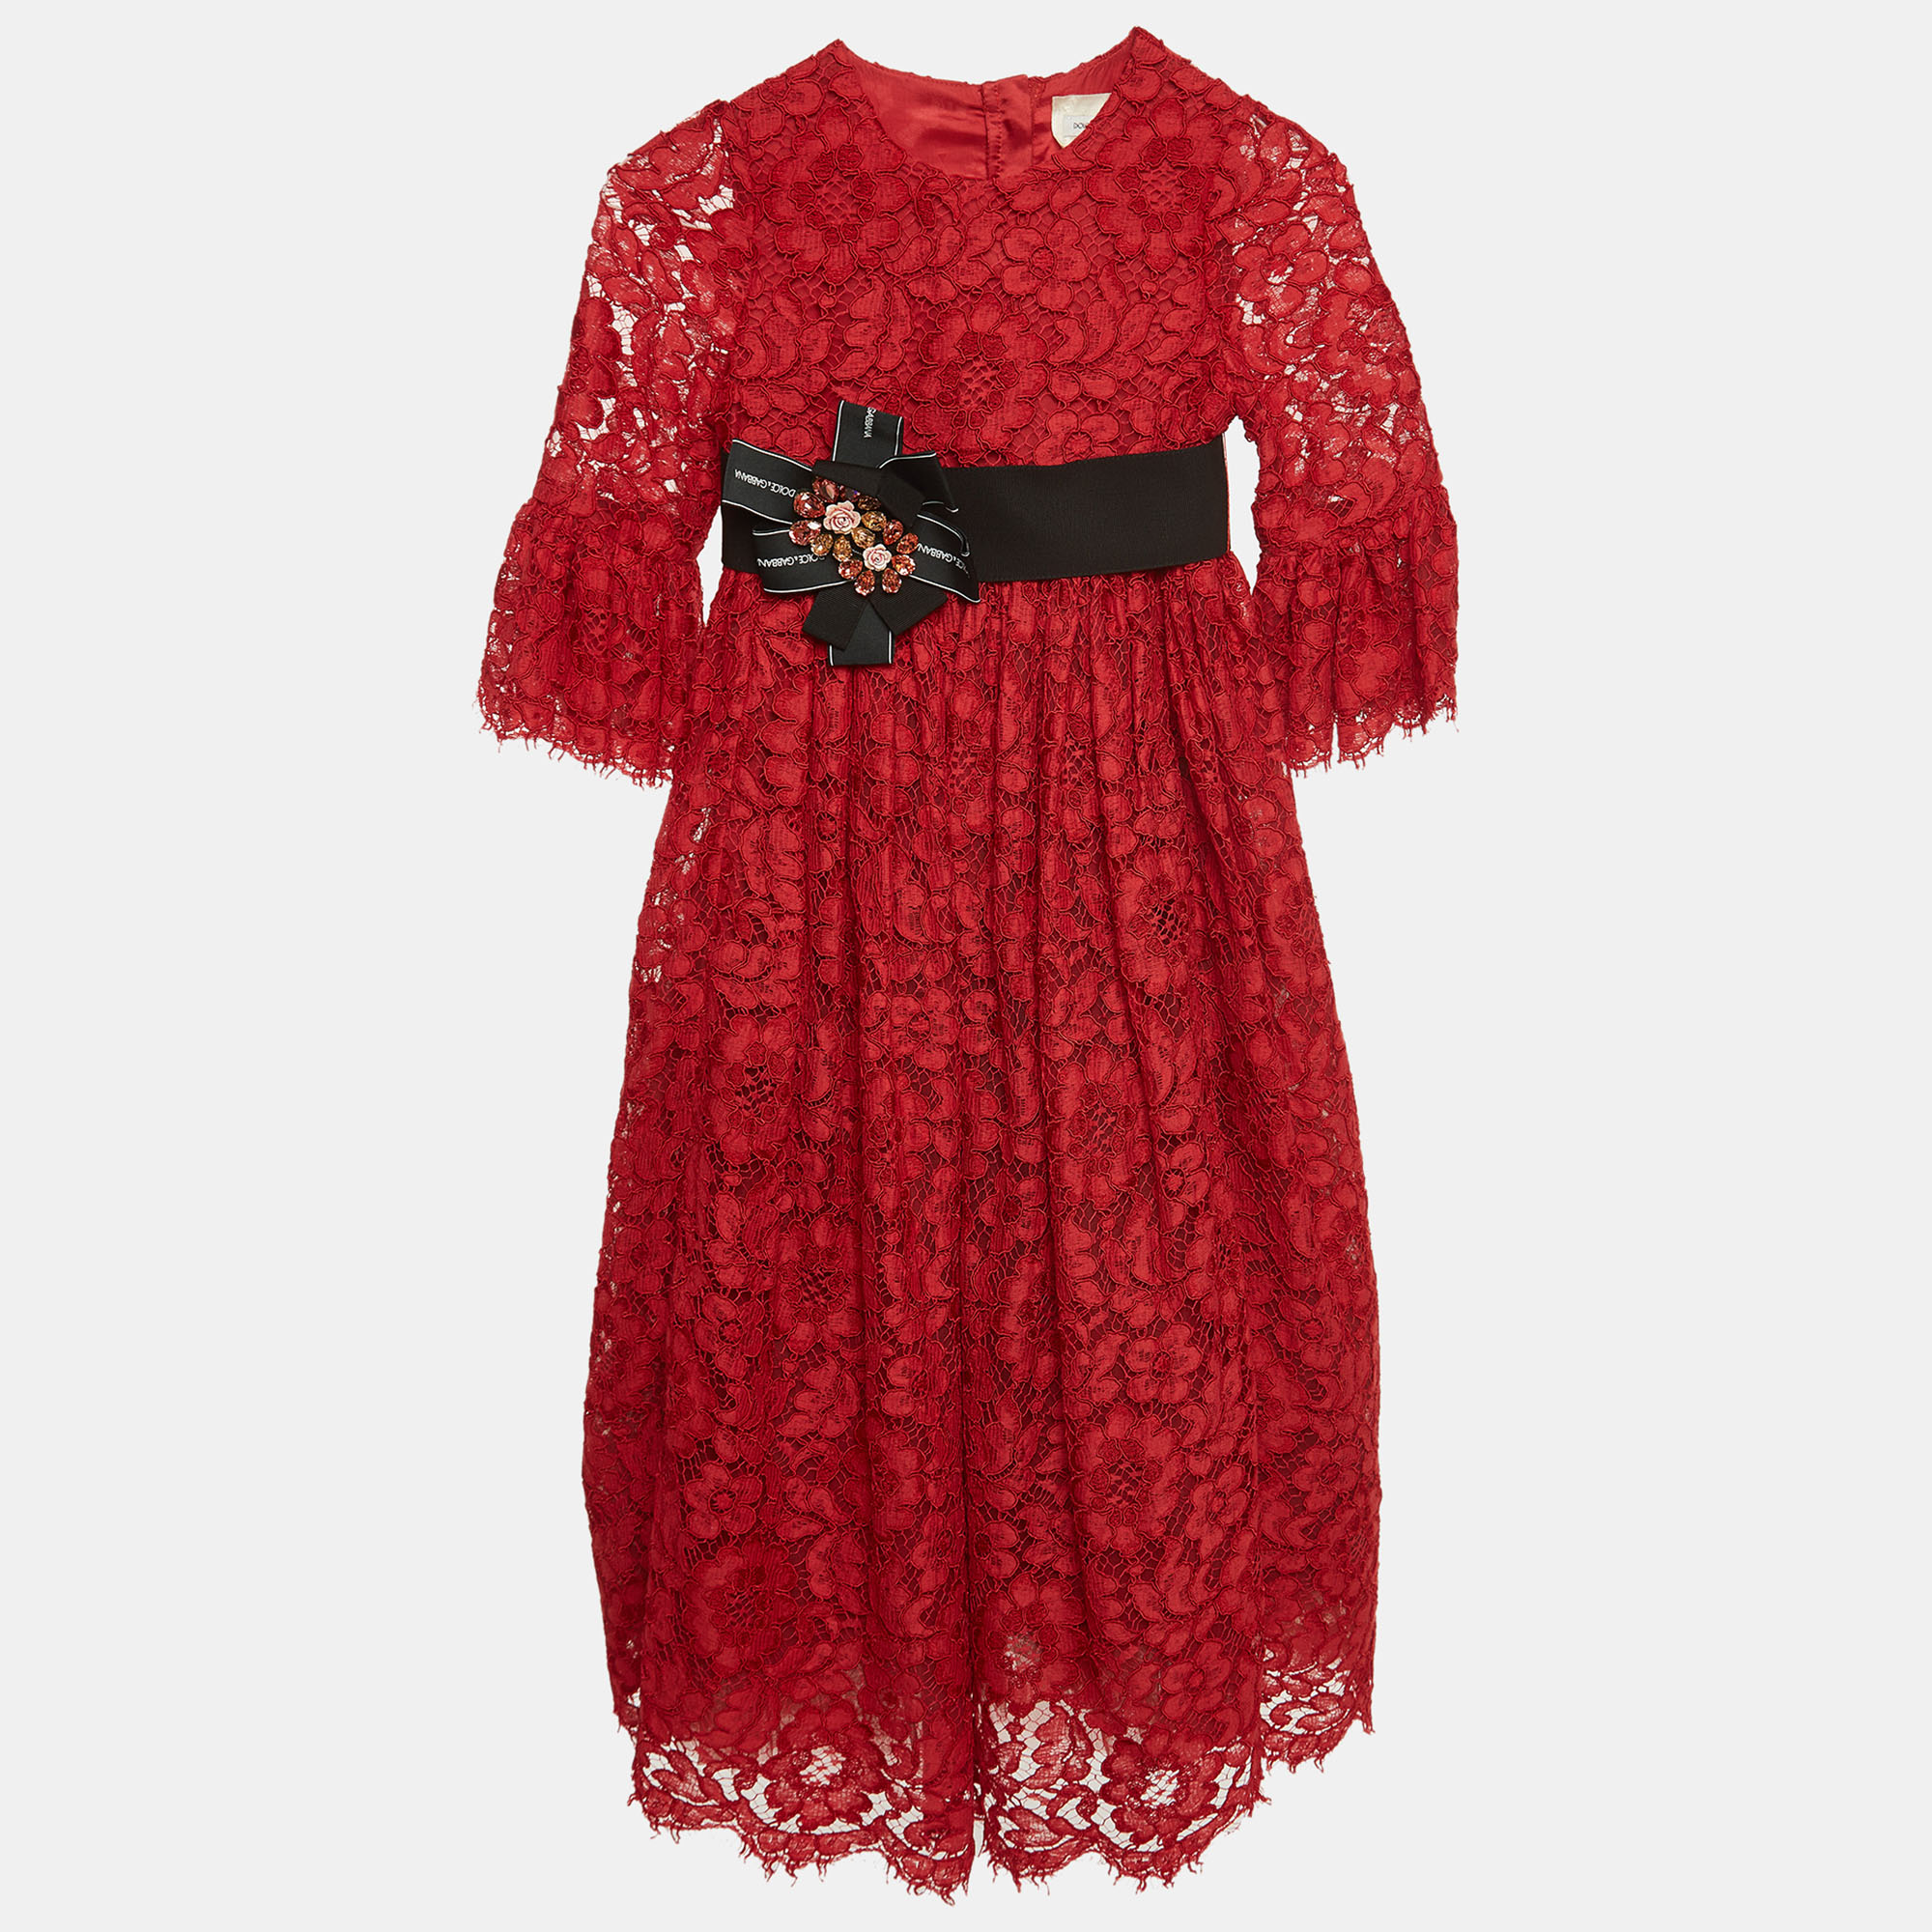 Dolce & Gabbana Red Lace Bow Detail Dress (6 Yrs)